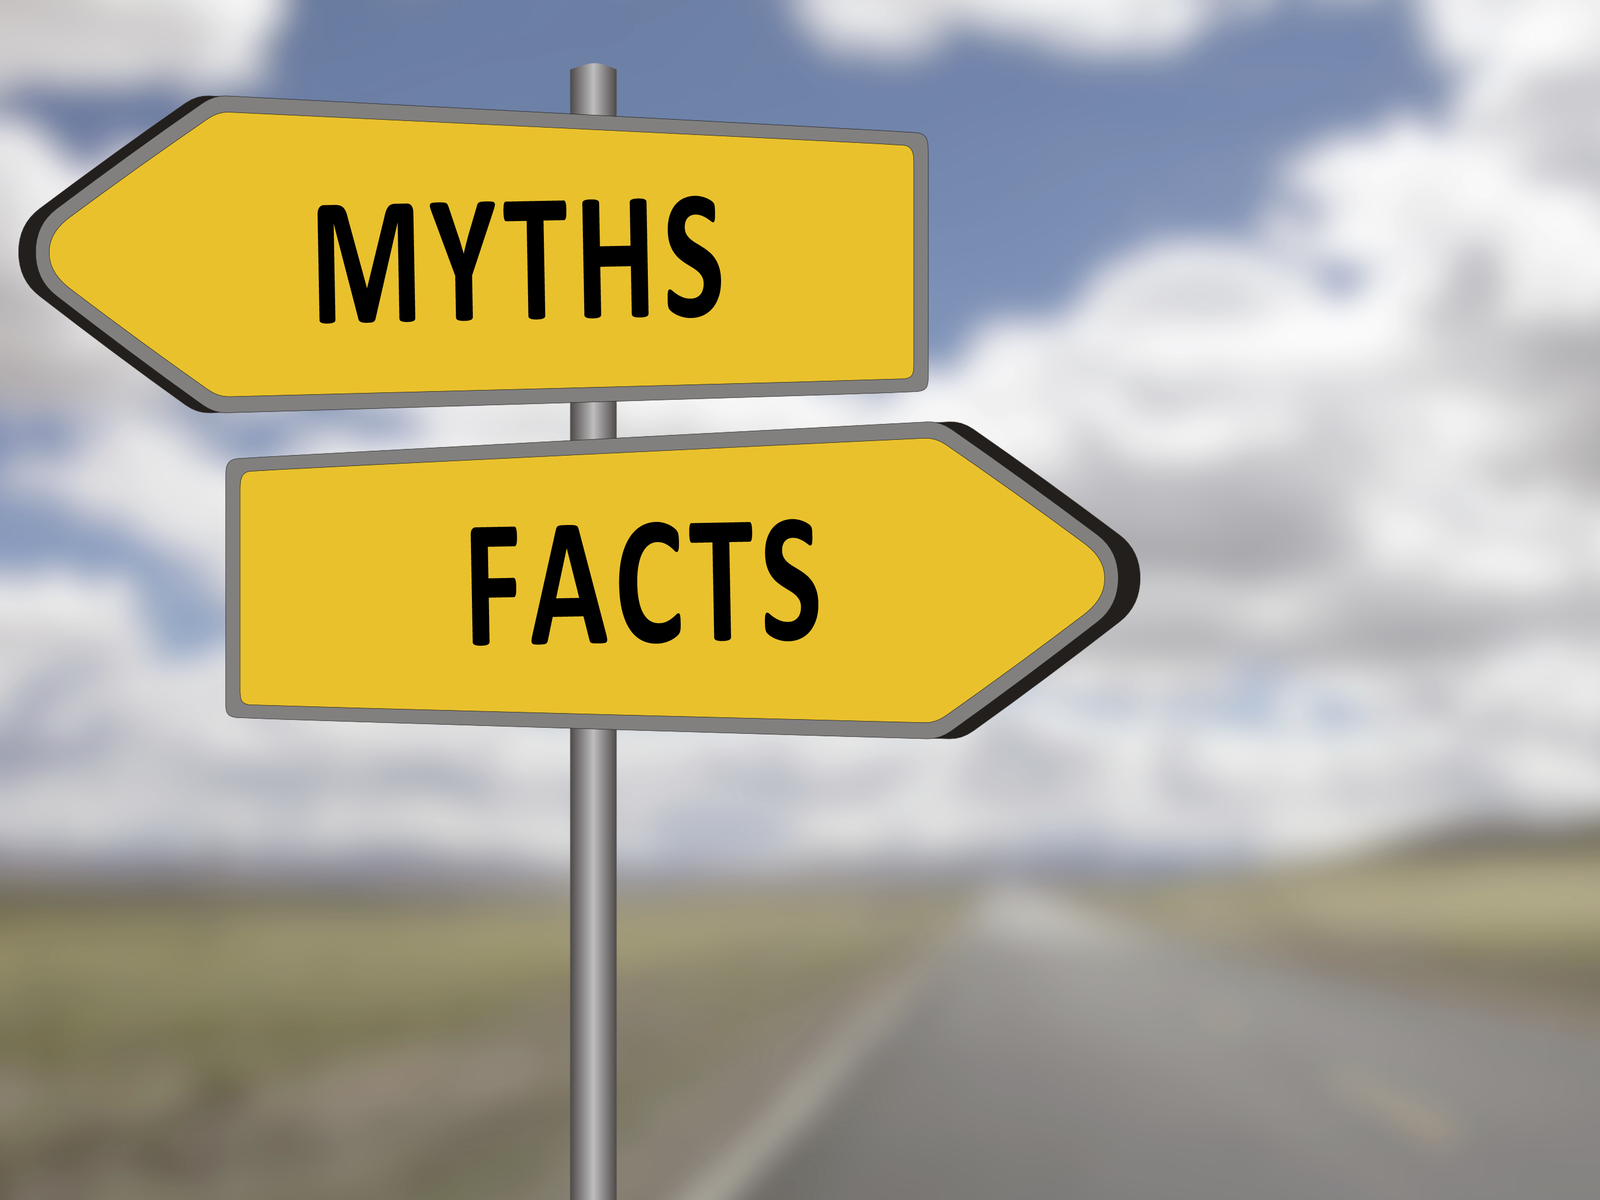 Myths or facts opposite road signs